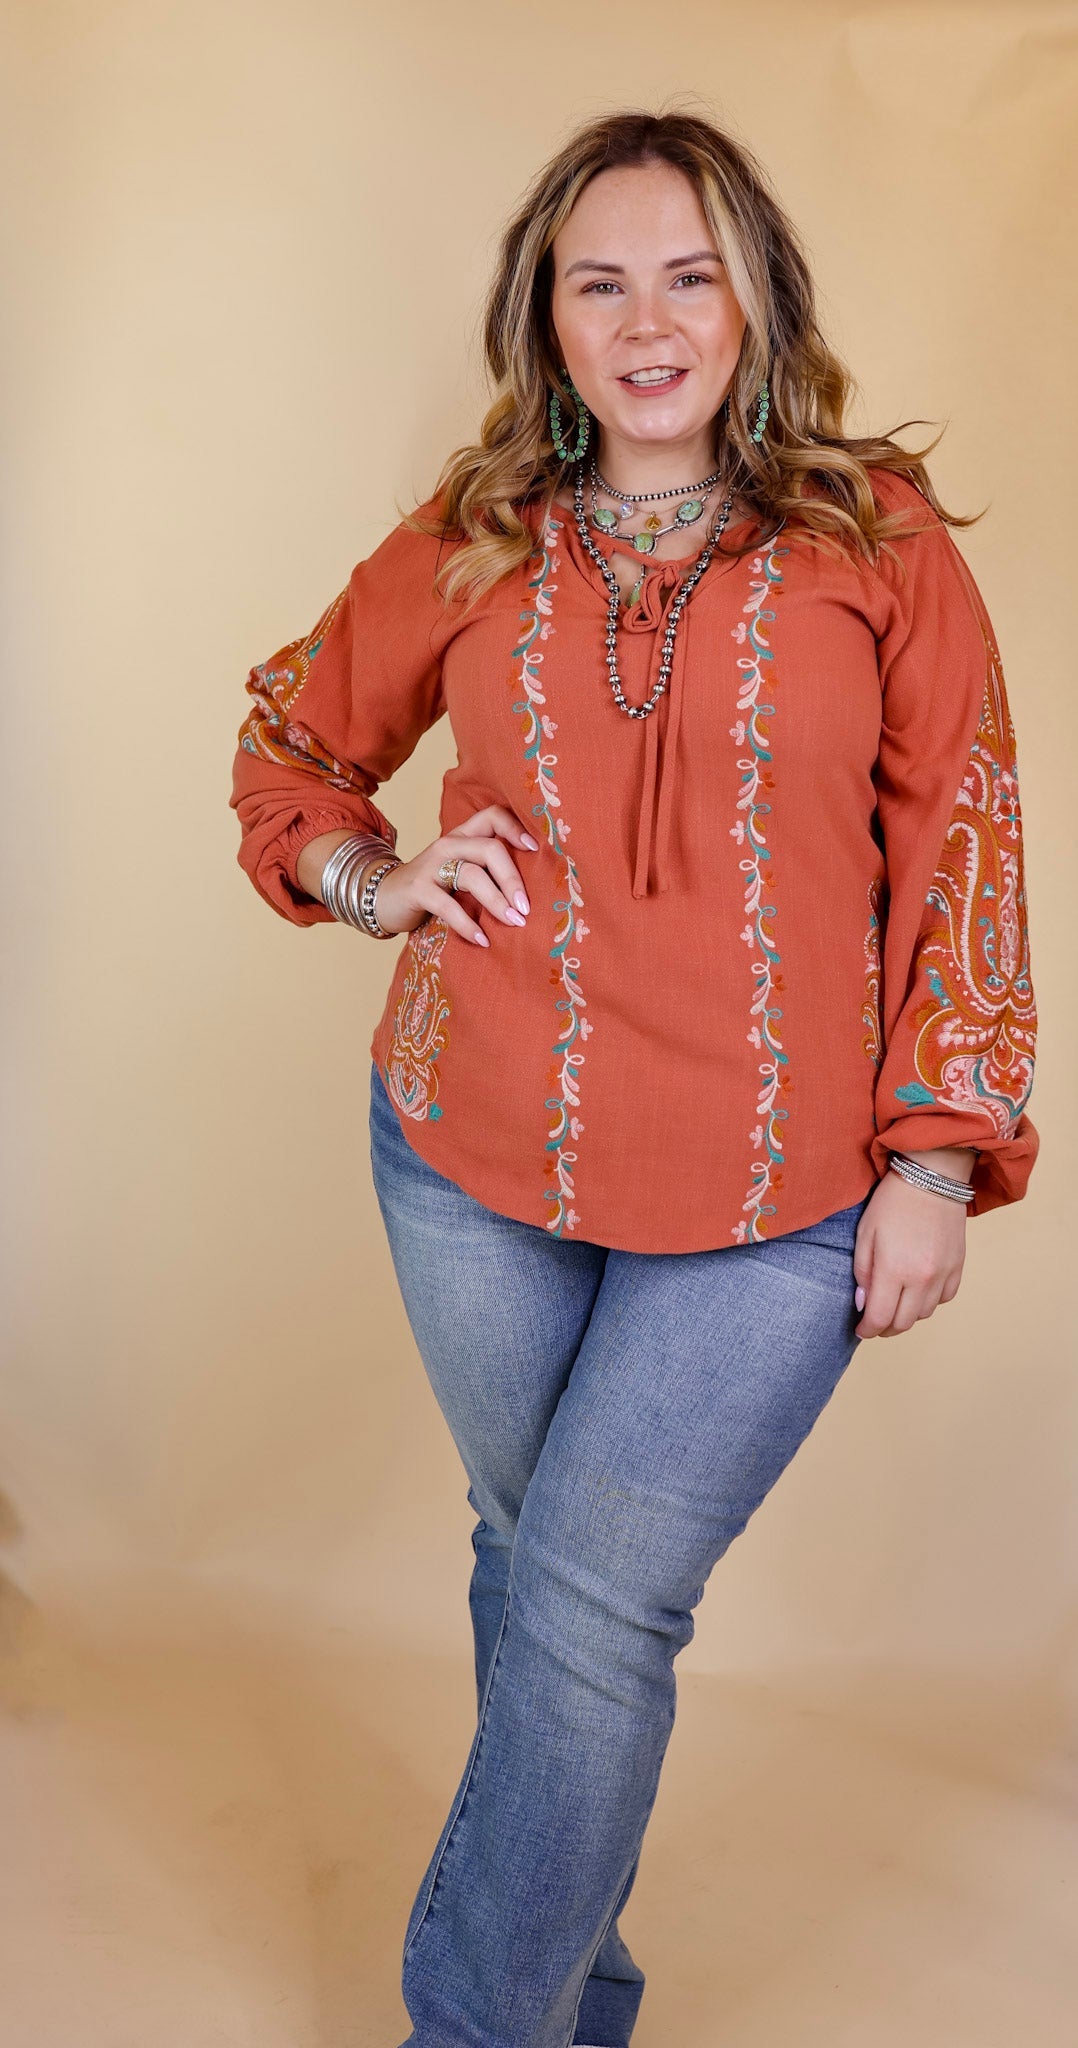 Warm Personality Floral Embroidered Long Sleeve Top with Front Keyhole and Tie in Clay Orange